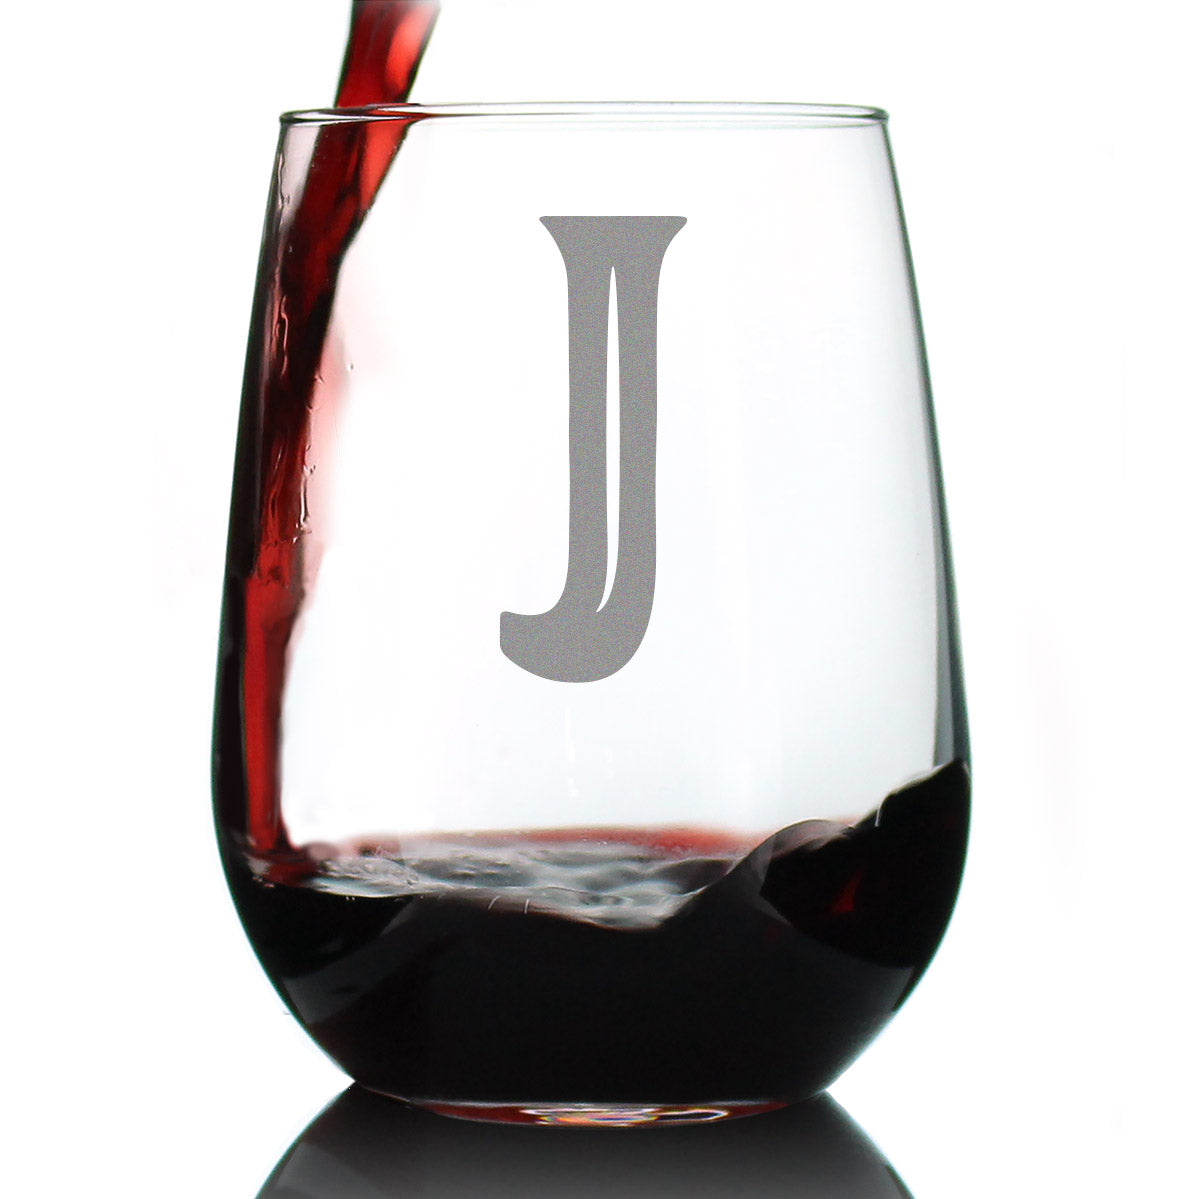 Monogram Bold Letter J - Stemless Wine Glass - Personalized Gifts for Women and Men - Large Engraved Glasses